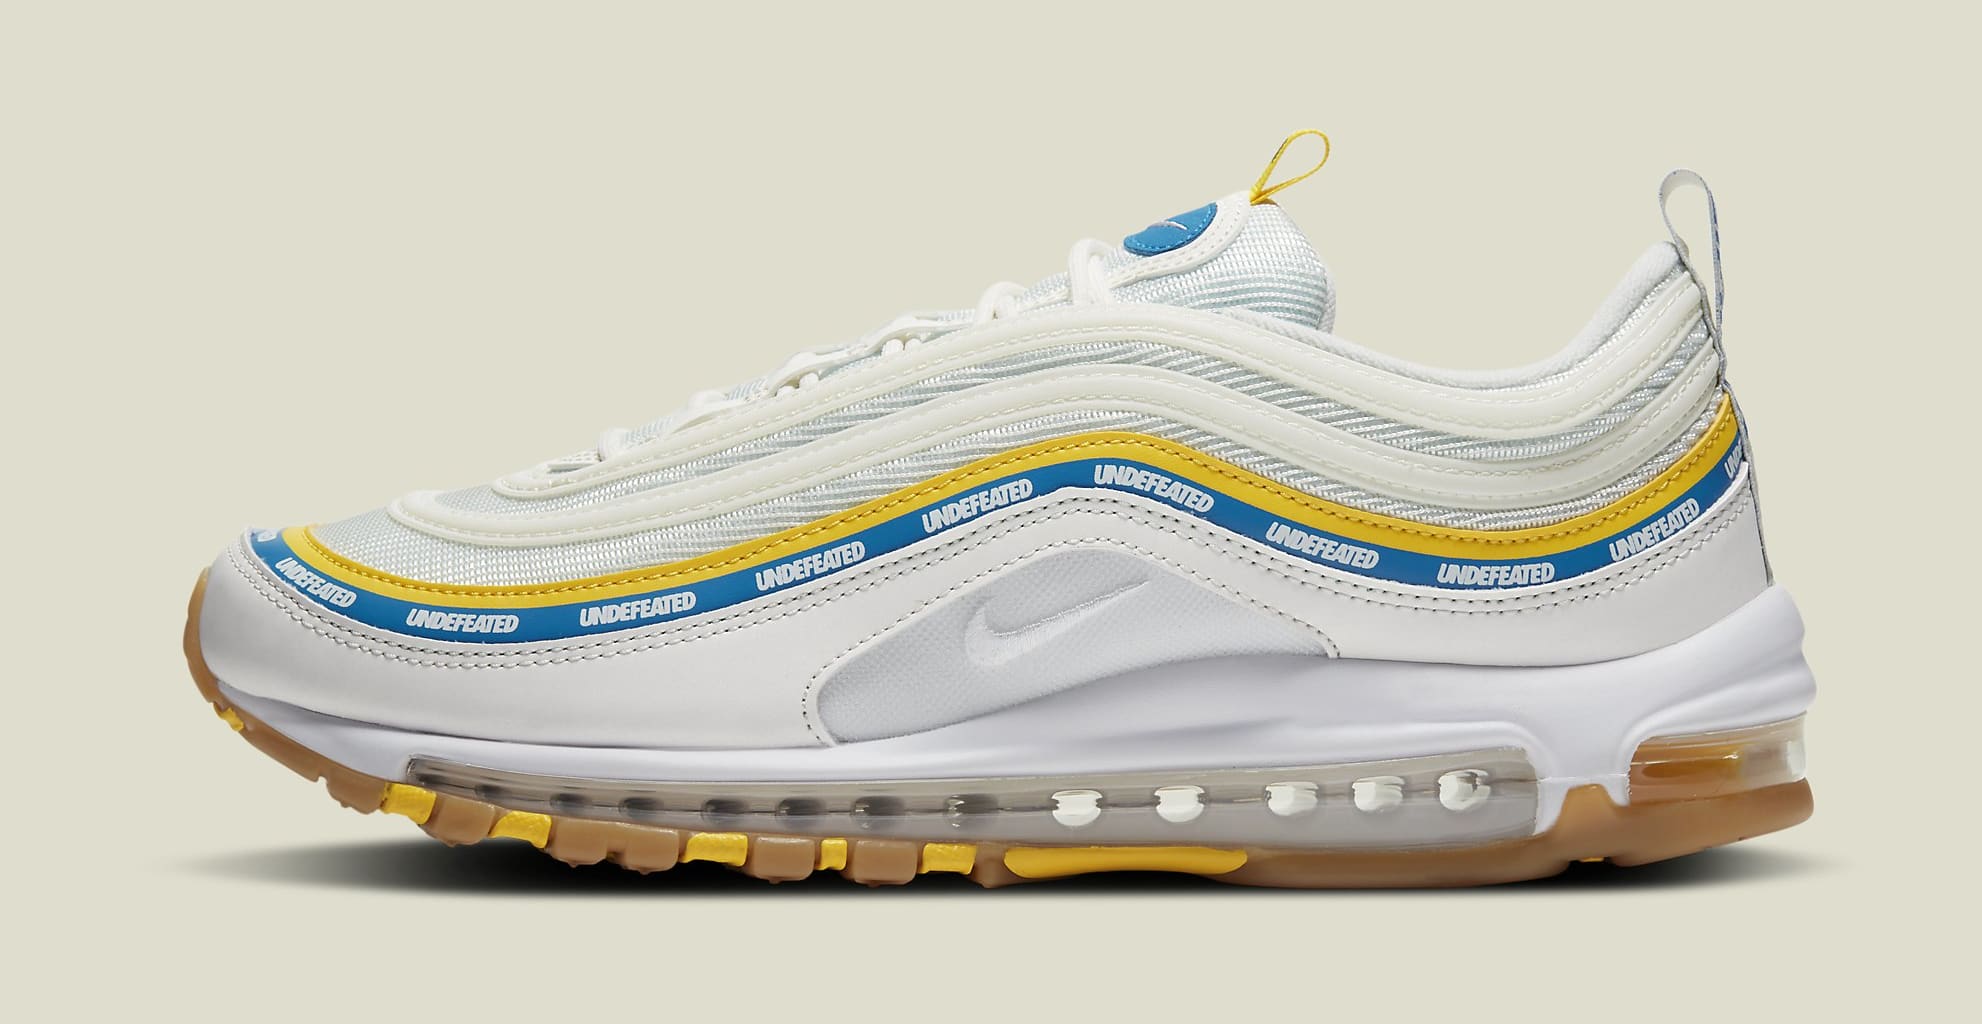 Undefeated x Nike Air Max 97 Release Date DC4830-300 DC4830-001 ...